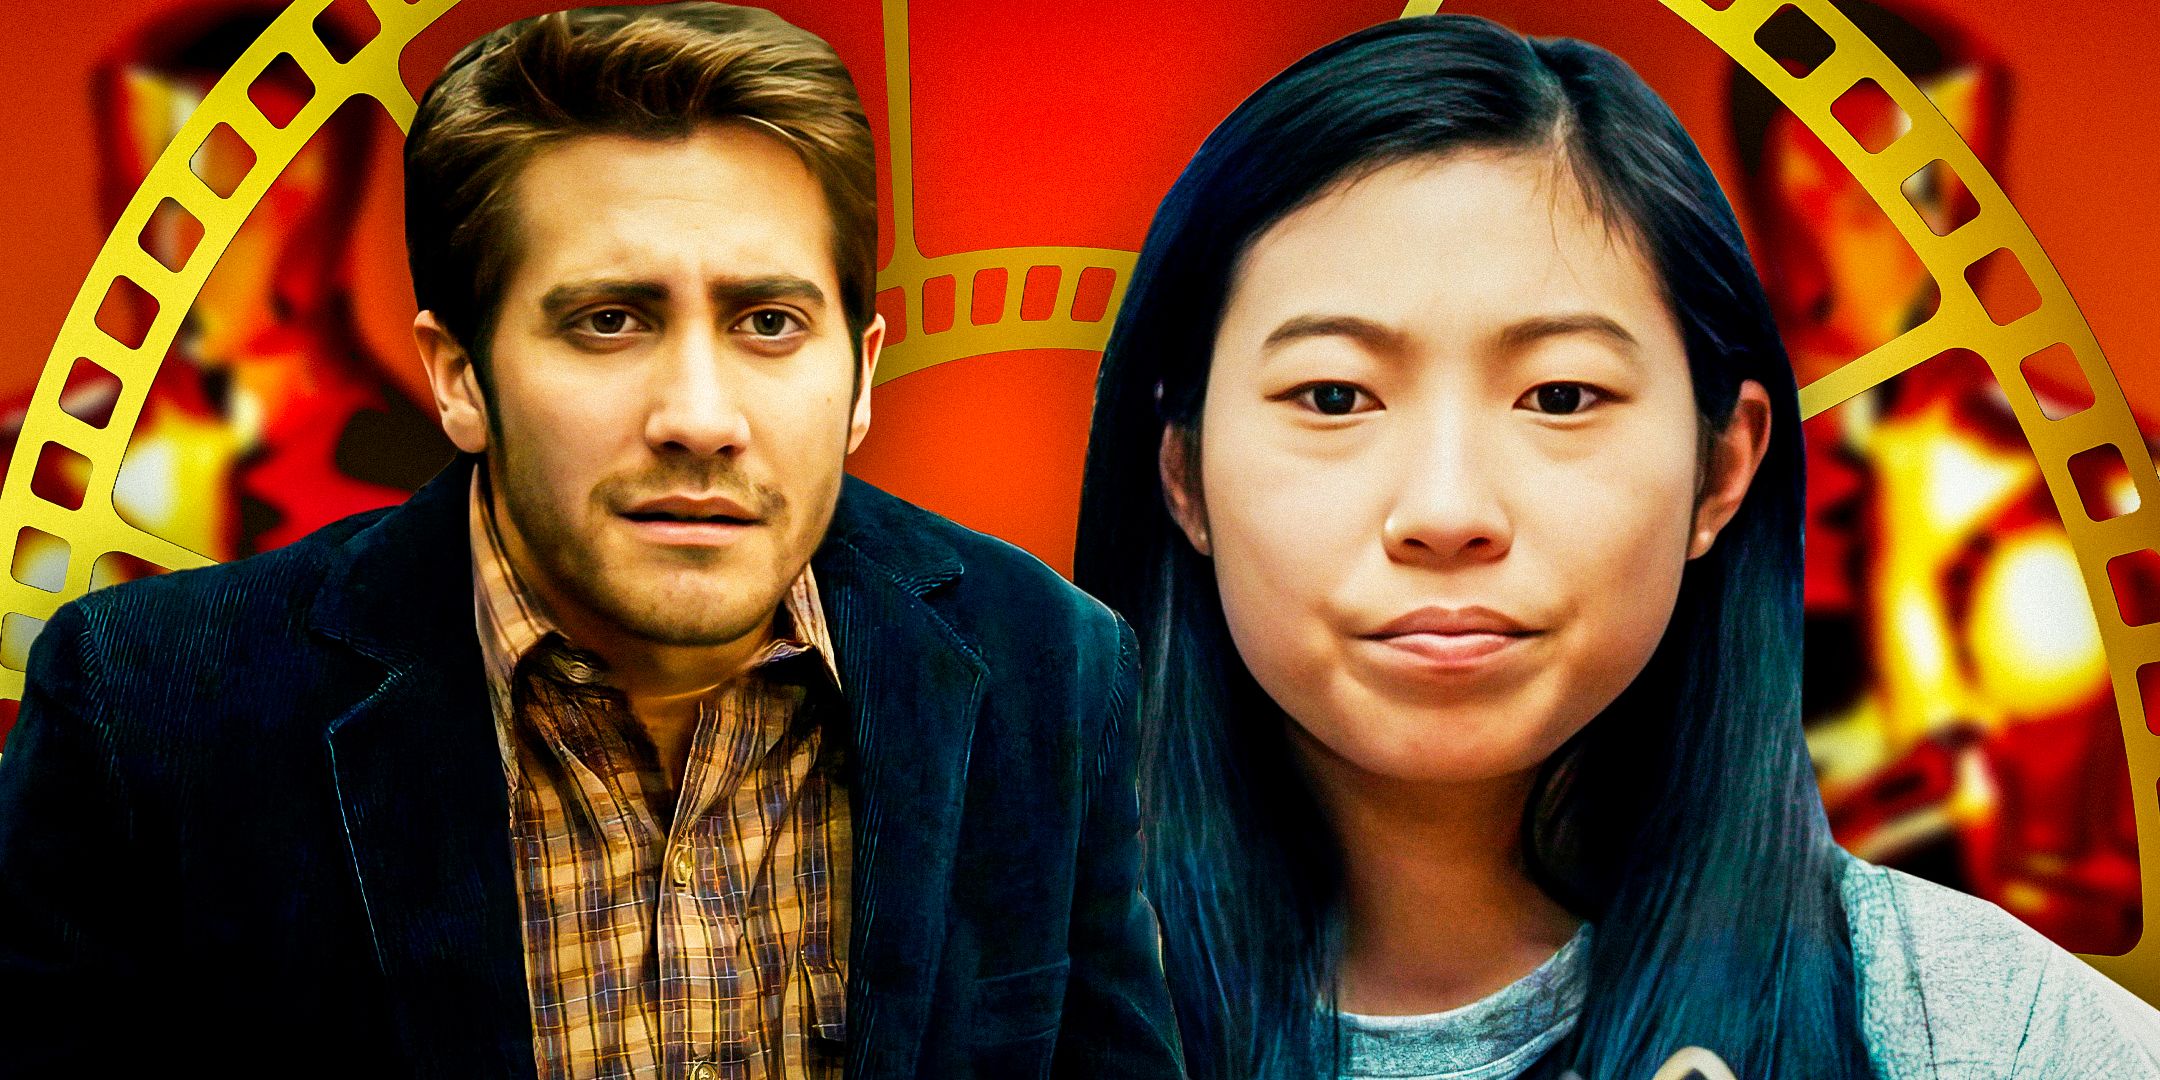 Jake-Gyllenhaal-as-Robert-Graysmith-from-Zodiac-and-Awkwafina-as-Billi-from-The-Farewell